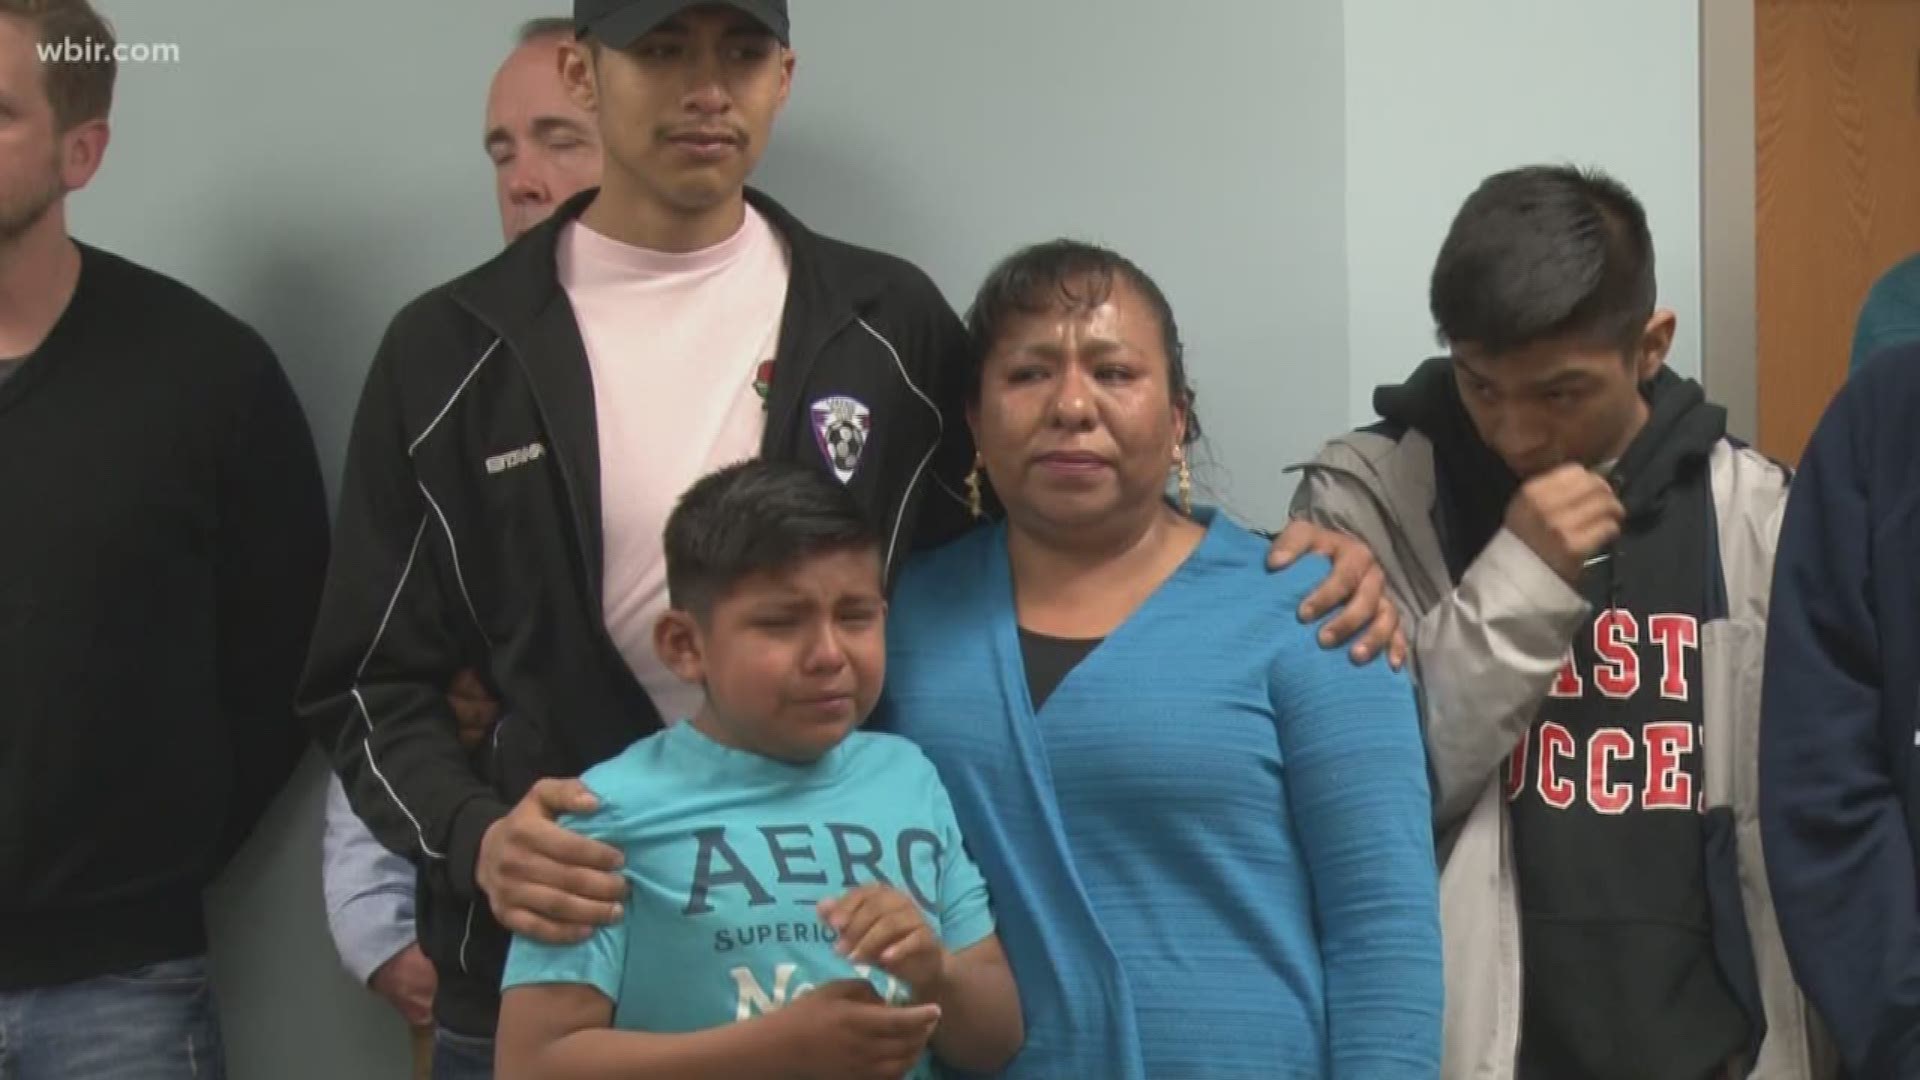 Local faith leaders are supporting the families who are seeking safety after an ICE raid. 